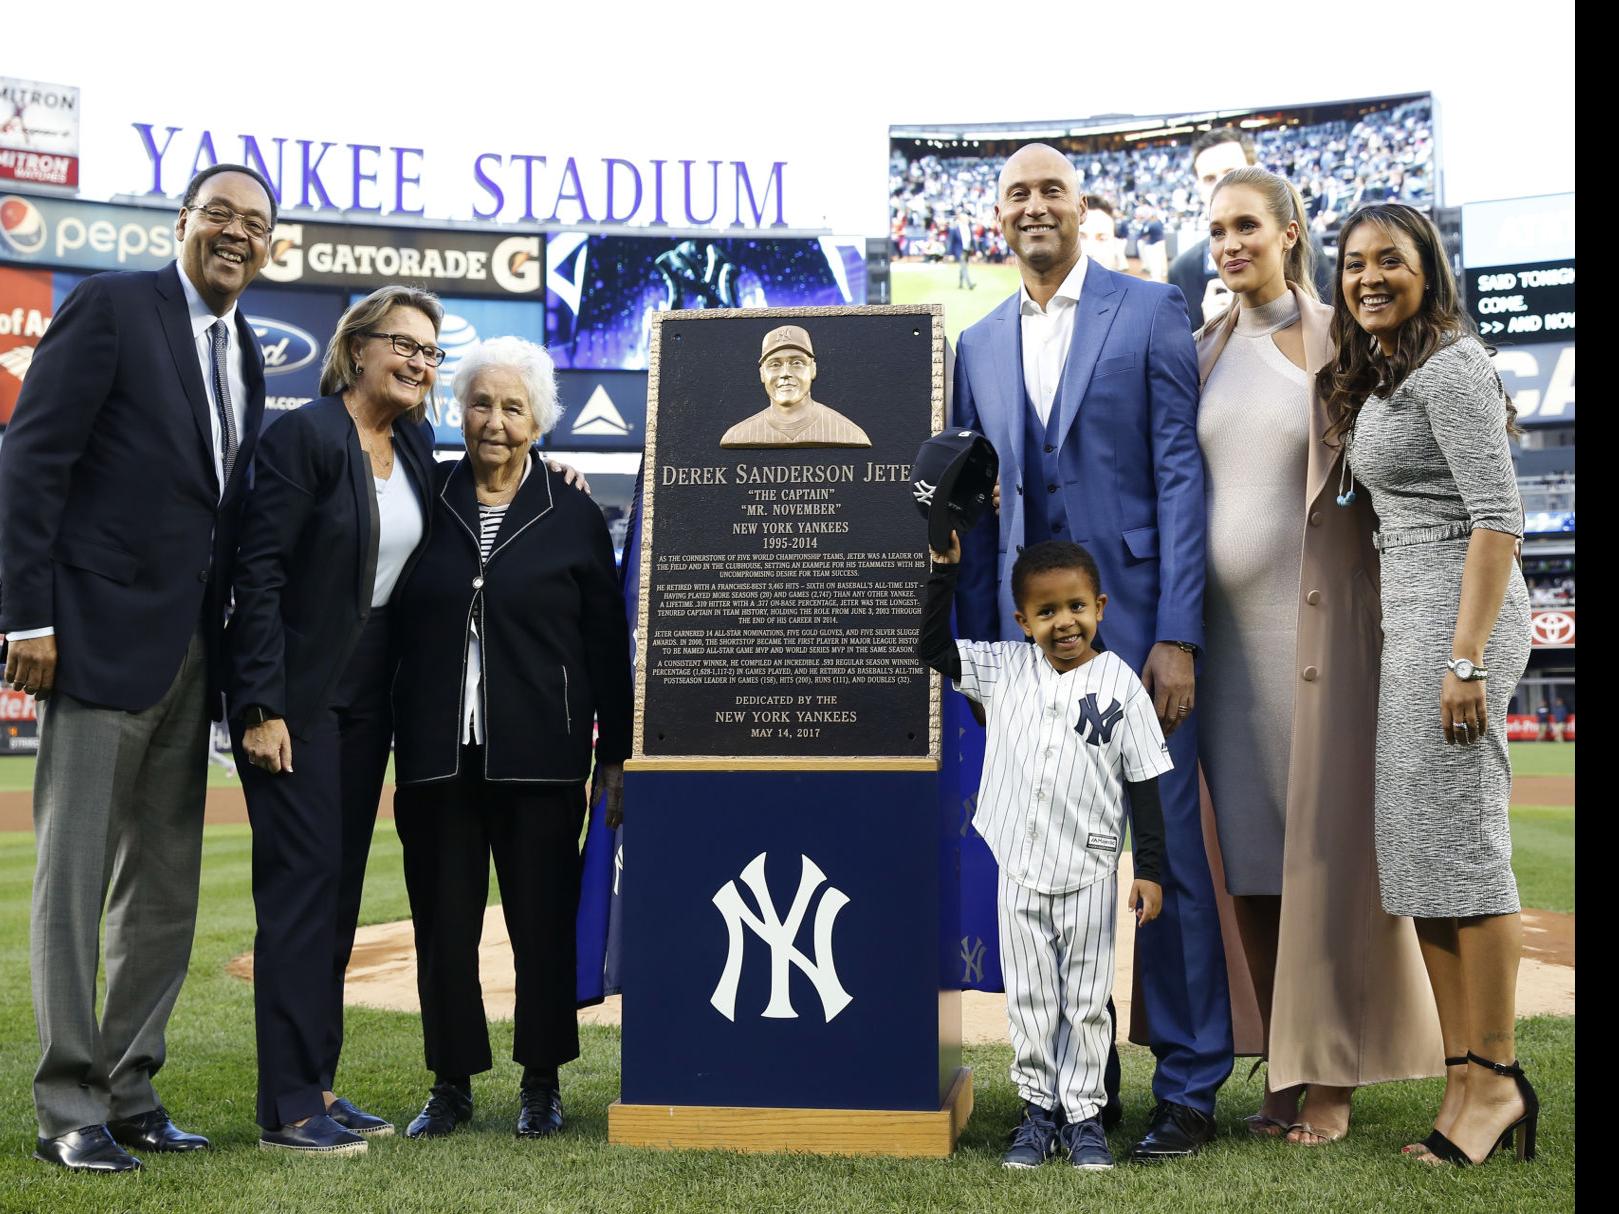 Jeter's No. 2 retired by Yanks; Monument plaque unveiled, Sports